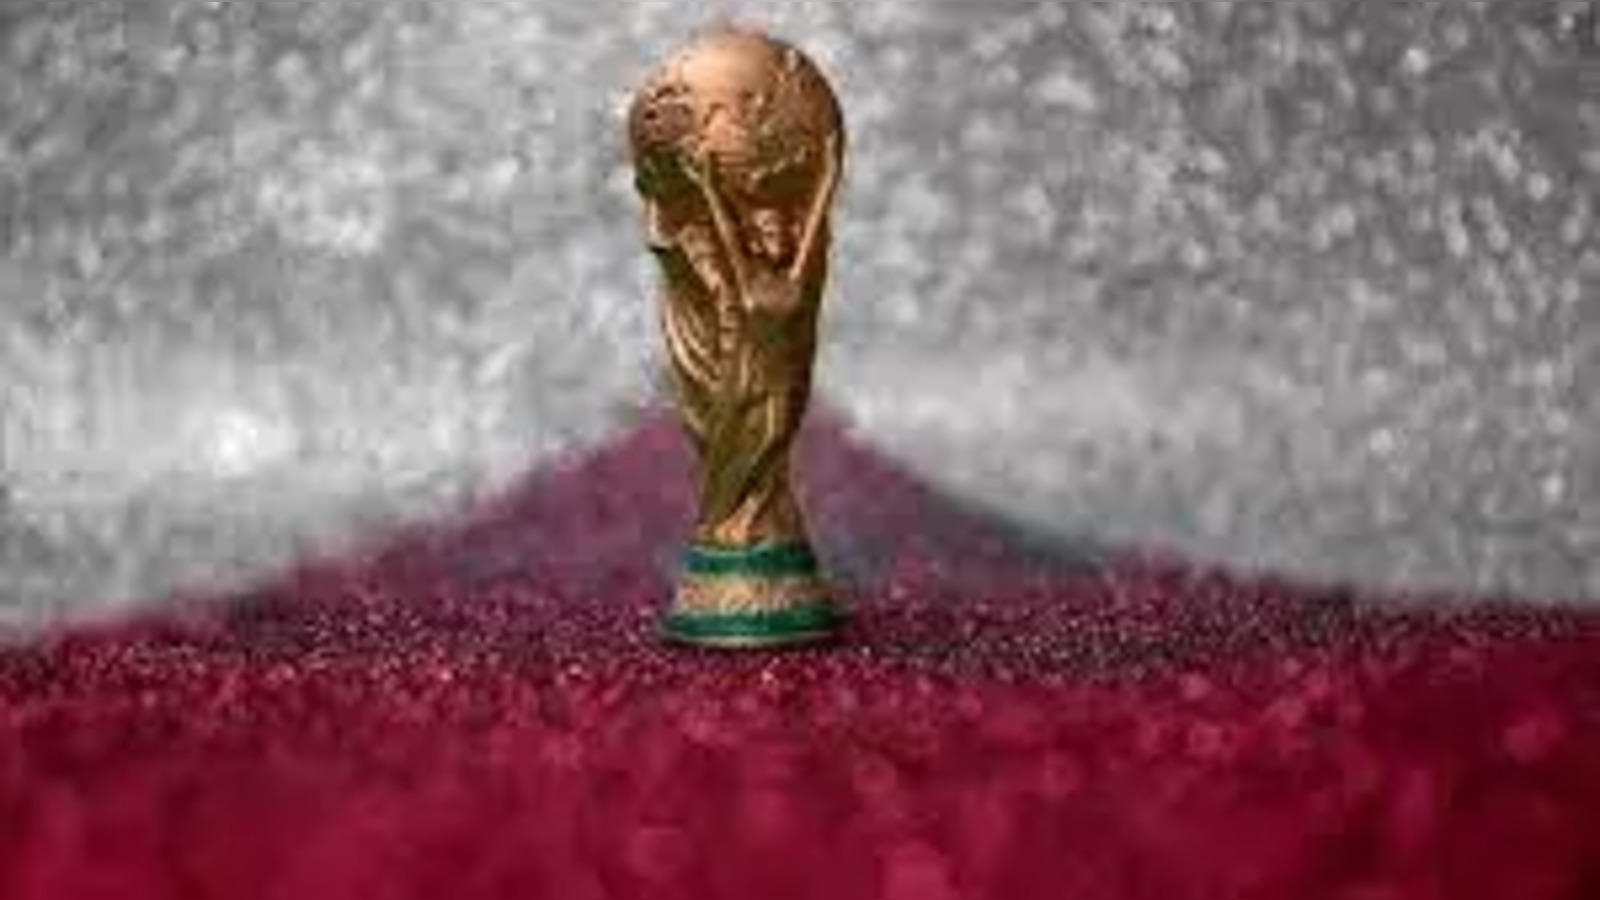 World Cup predictions: How many games did our AI get right?, Qatar World  Cup 2022 News